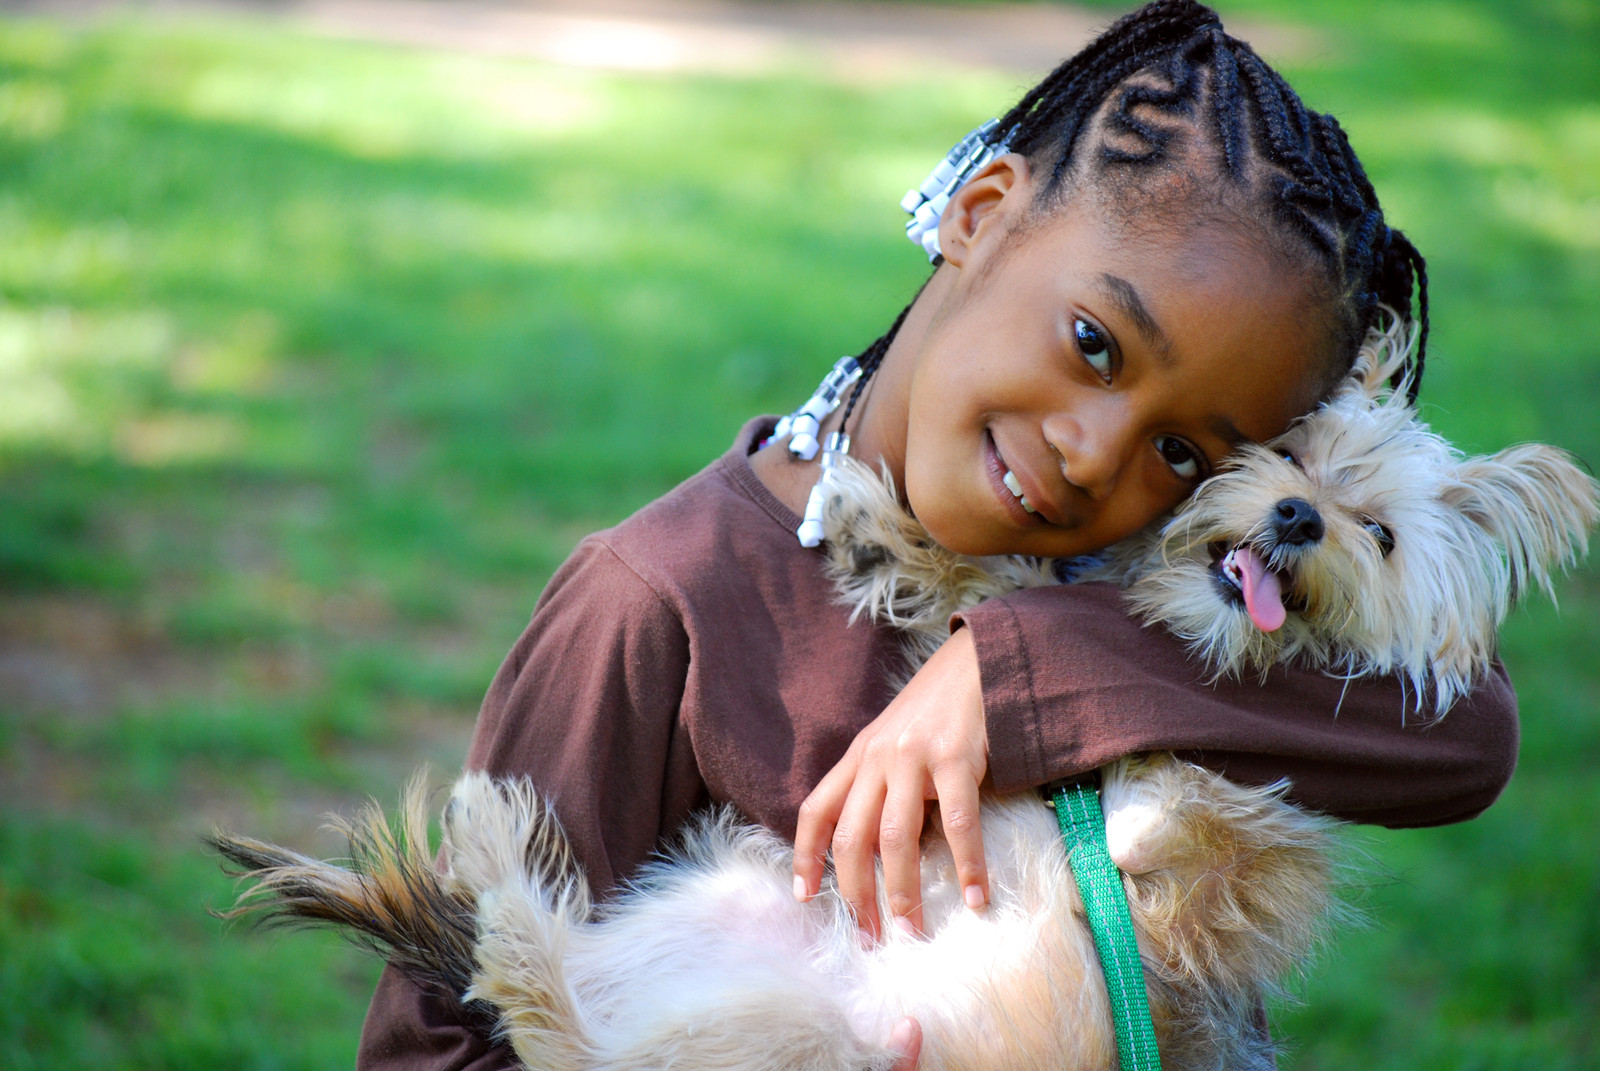 A young girl cradles and nuzzles a Yorkshire Terrier.